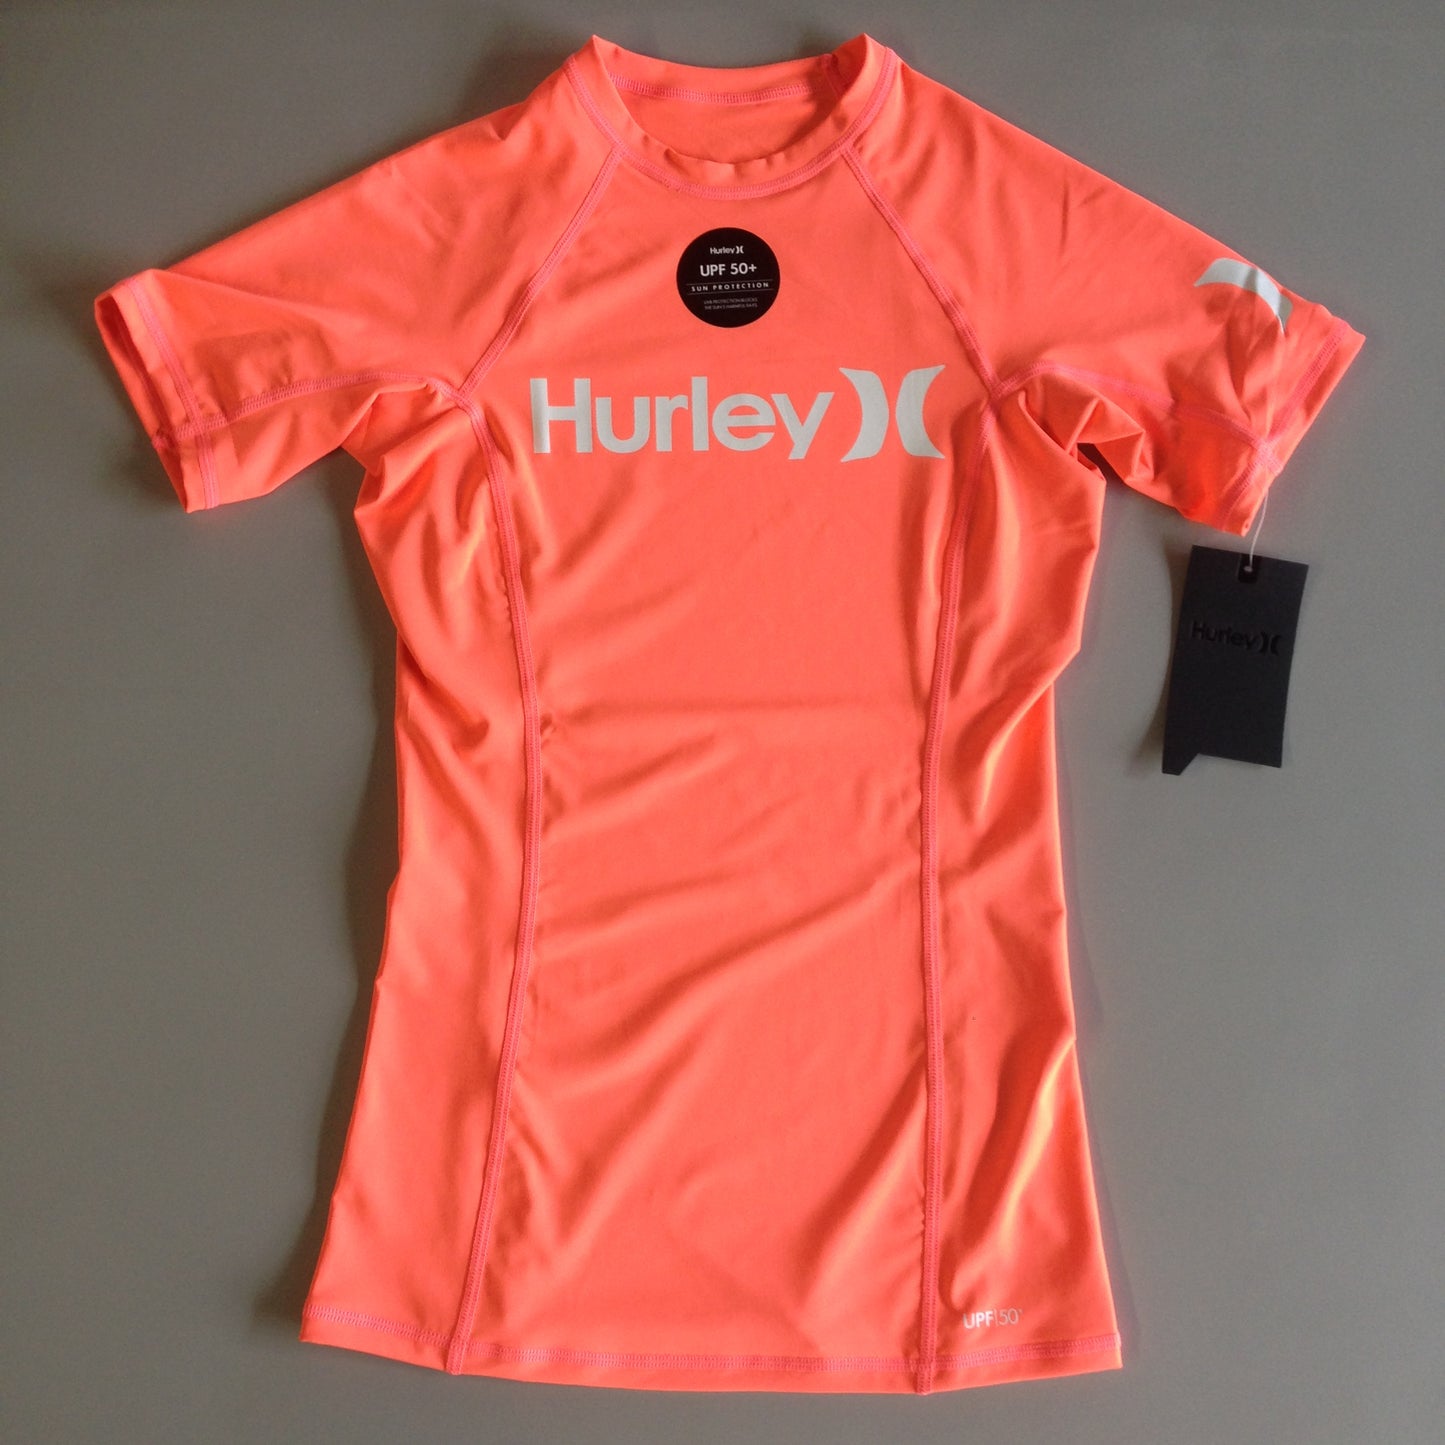 Hurley Women's One And Only Short Sleeve Rashguard